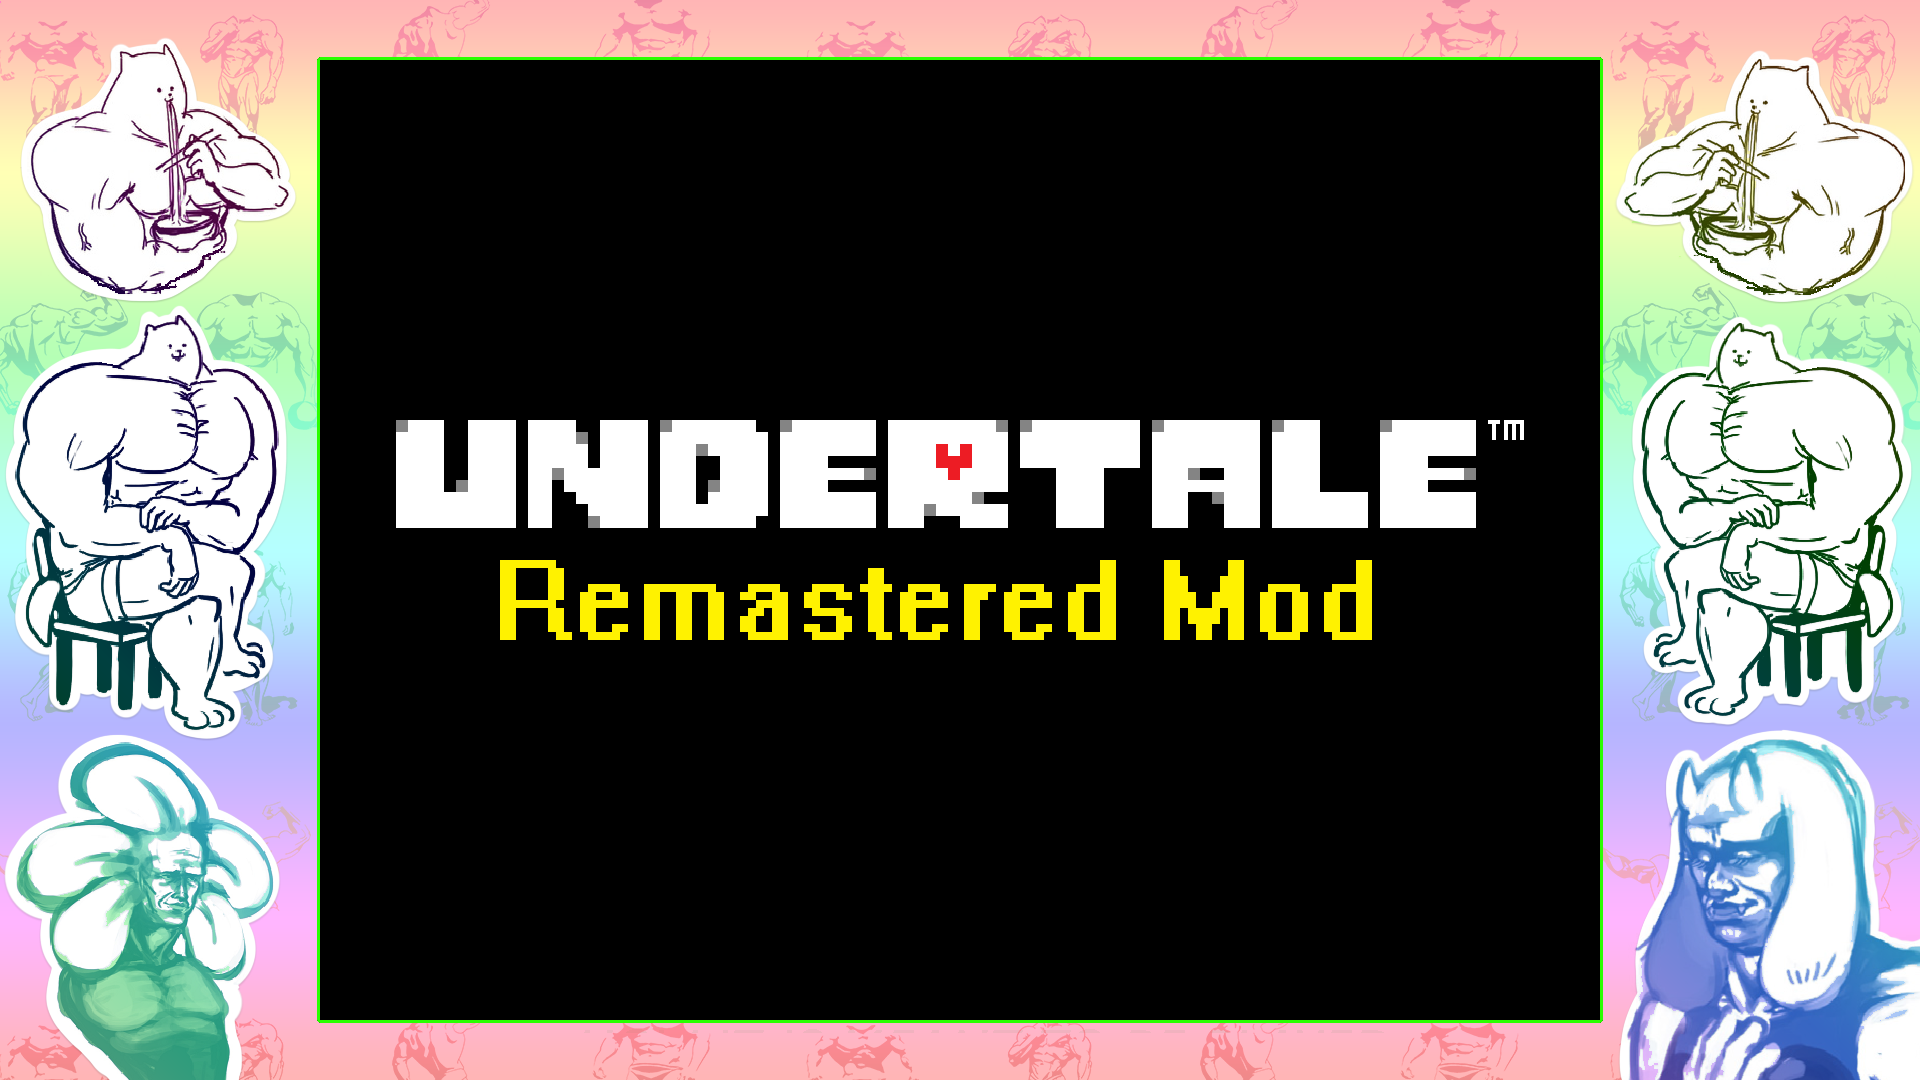 how to mod undertale